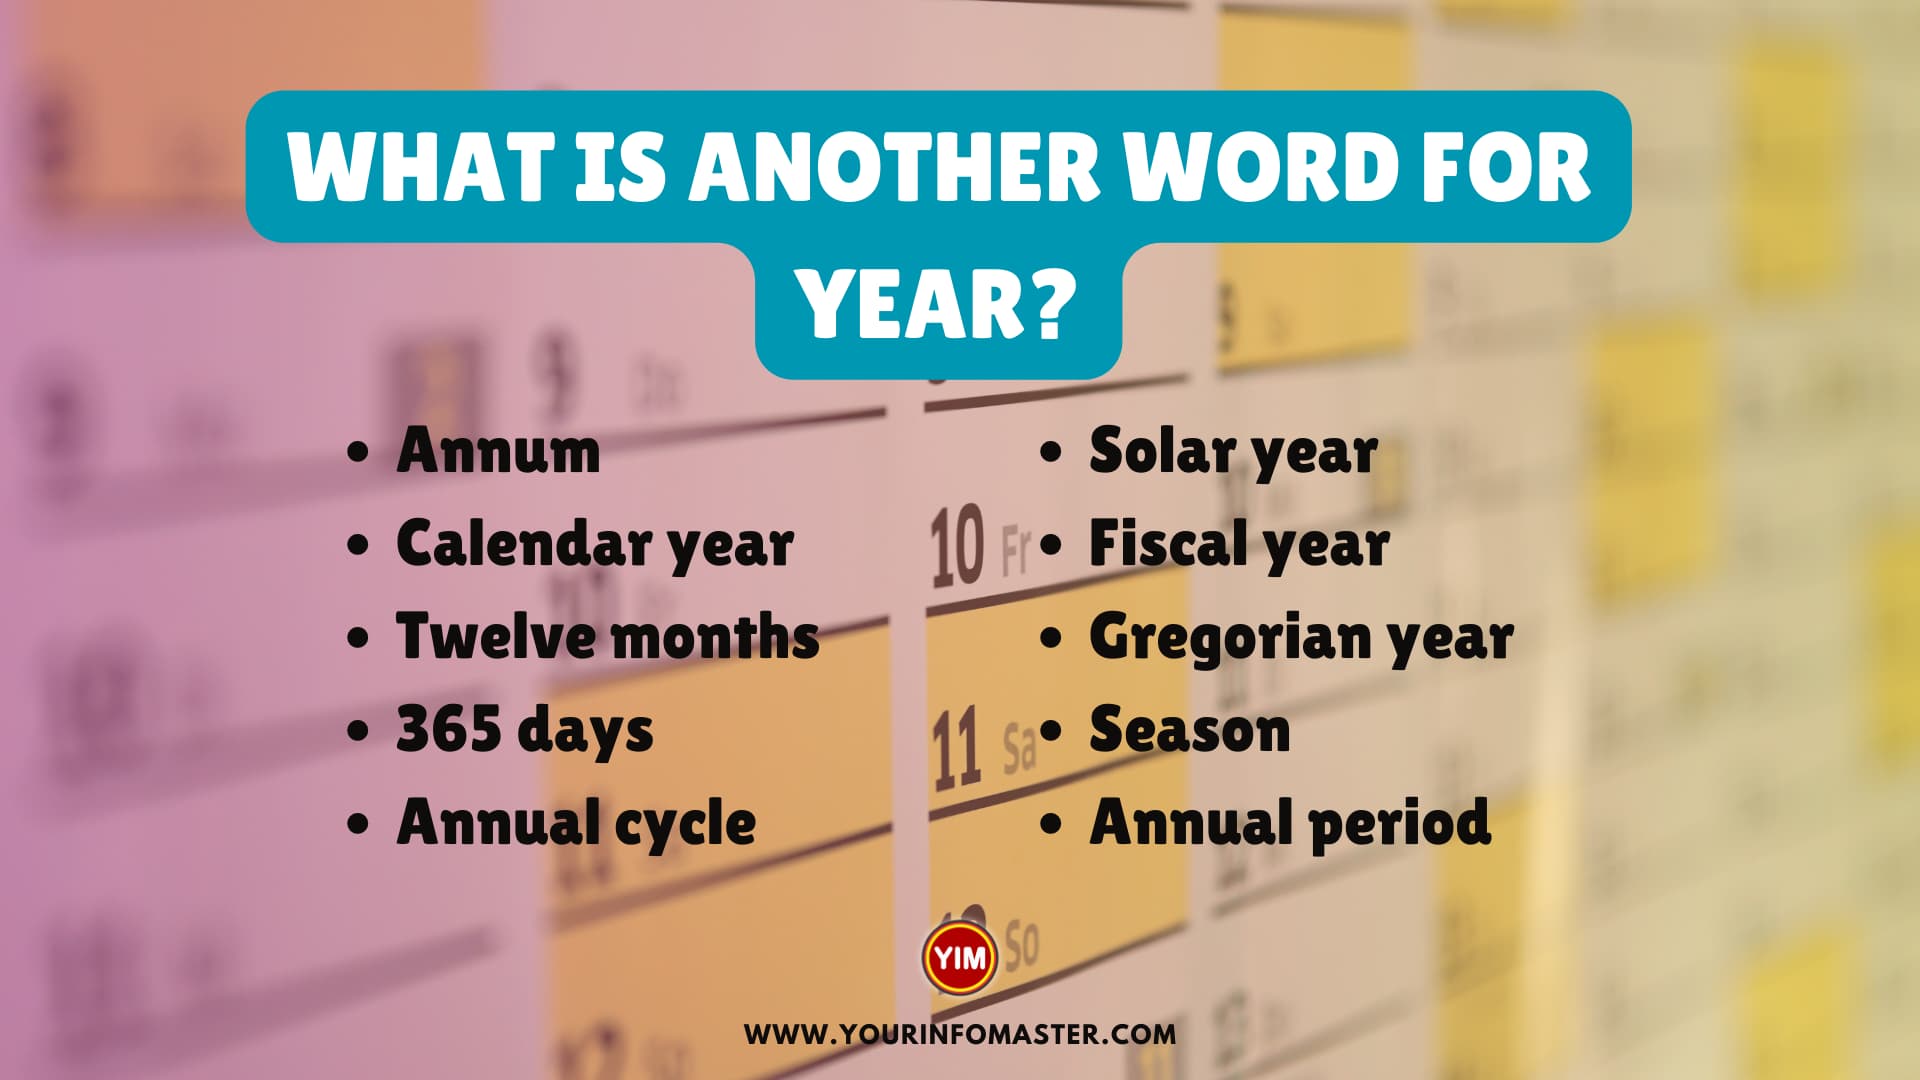 What is another word for Year